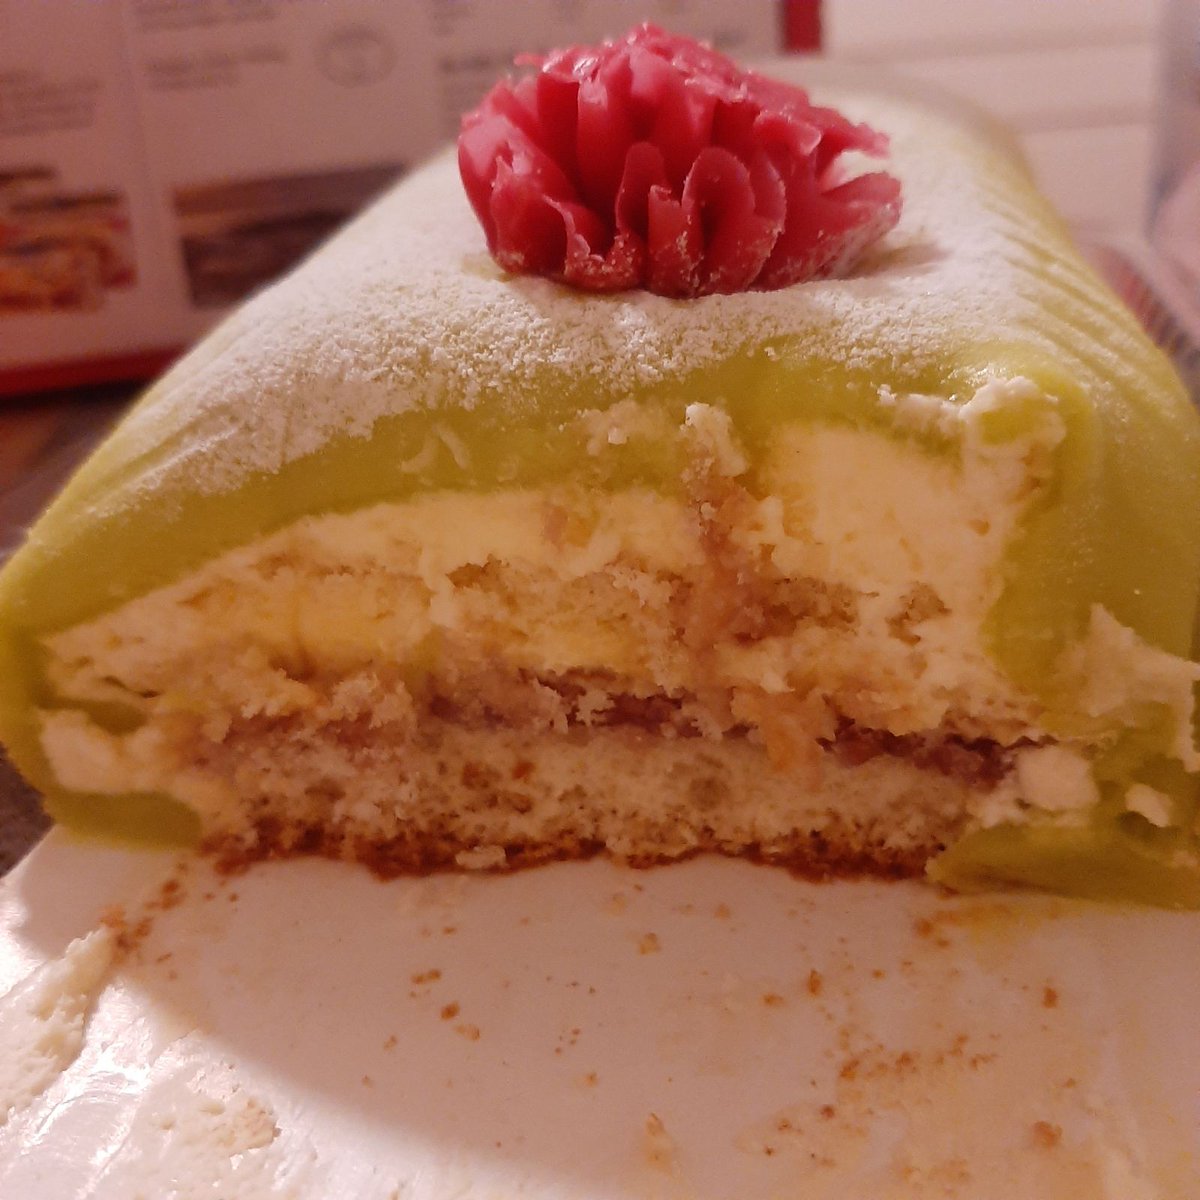 The best Swedish cake,dressed in marzipan🥰🍰
It's called Princess Cake

#homemade
#Sweden
#Princess #princesscake #swedishfood #Food #foodphotography #yummi